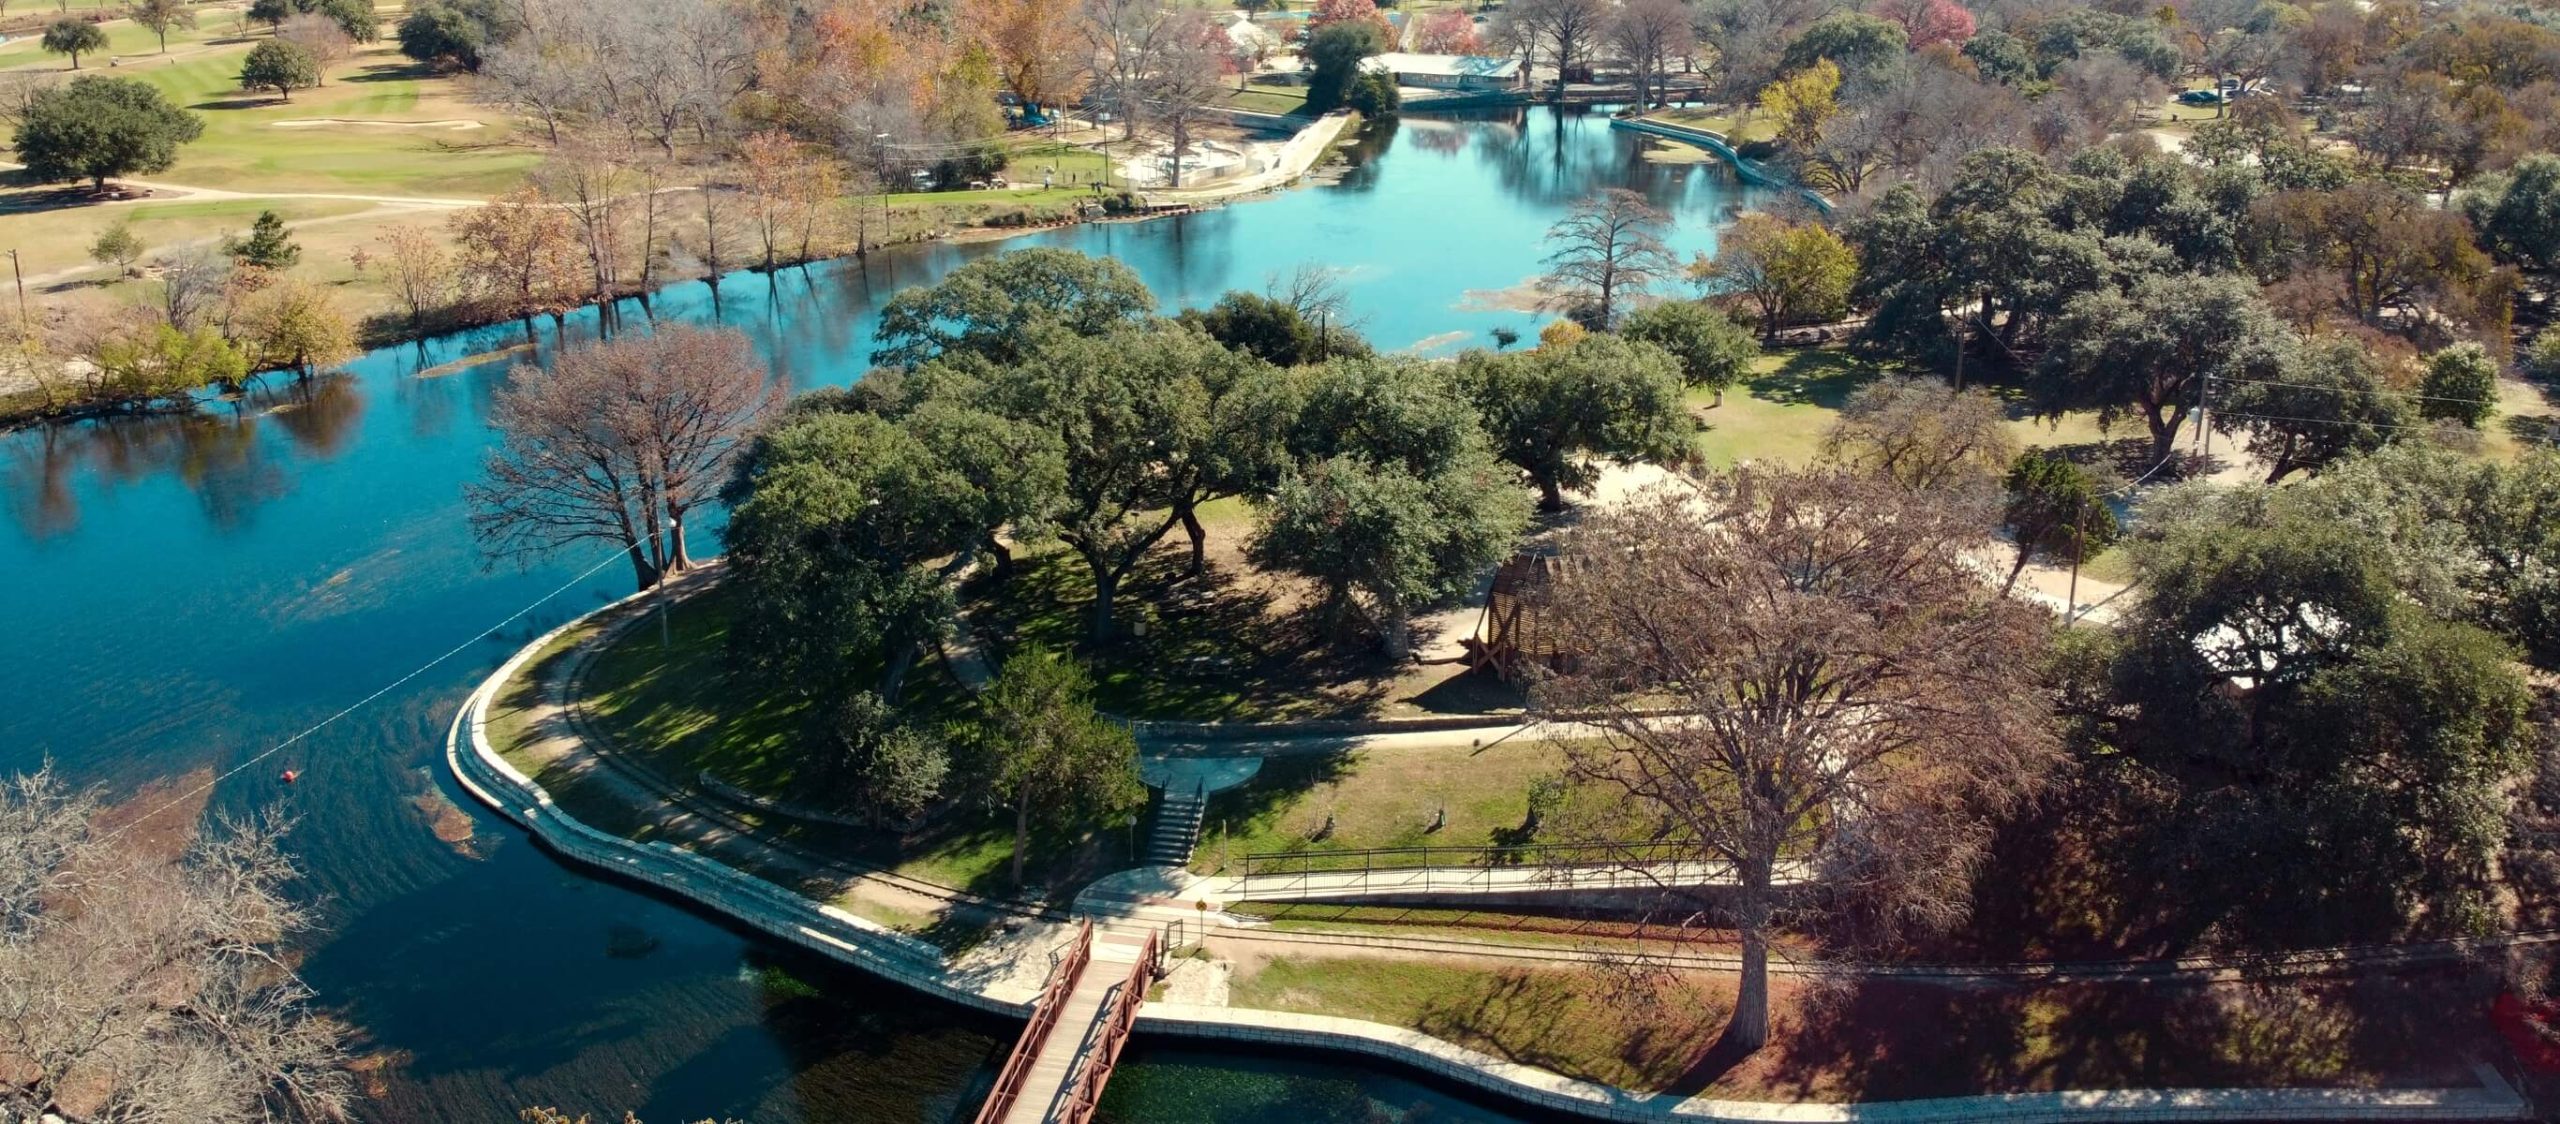 Aerial view of a park with trees and river, located in New Braunfels Texas.